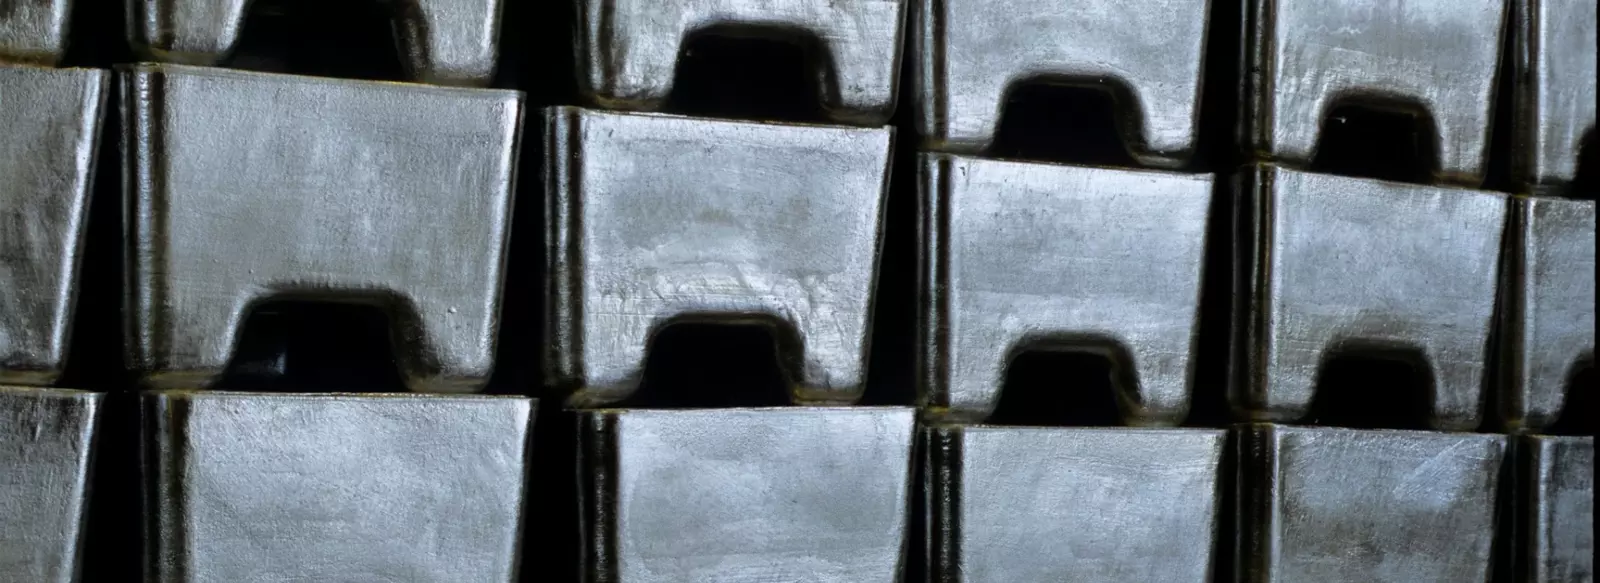 Stacked metal ingots arranged in a storage facility.